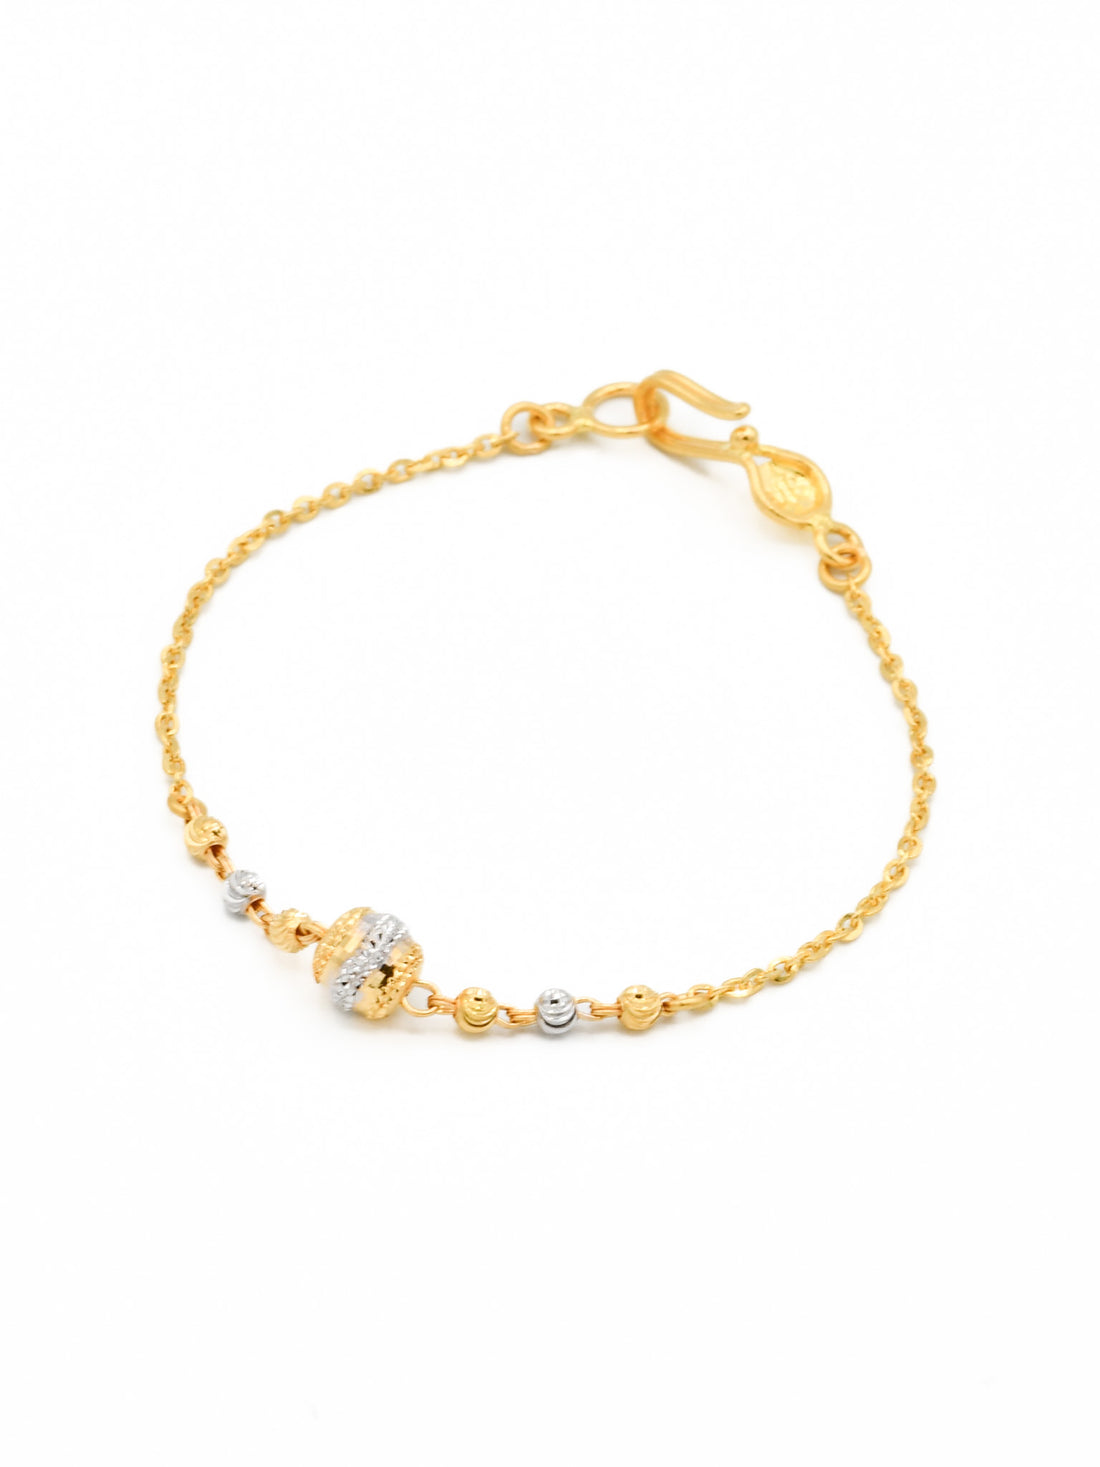 22ct Gold Two Tone Ball 1 PC Baby Bracelet